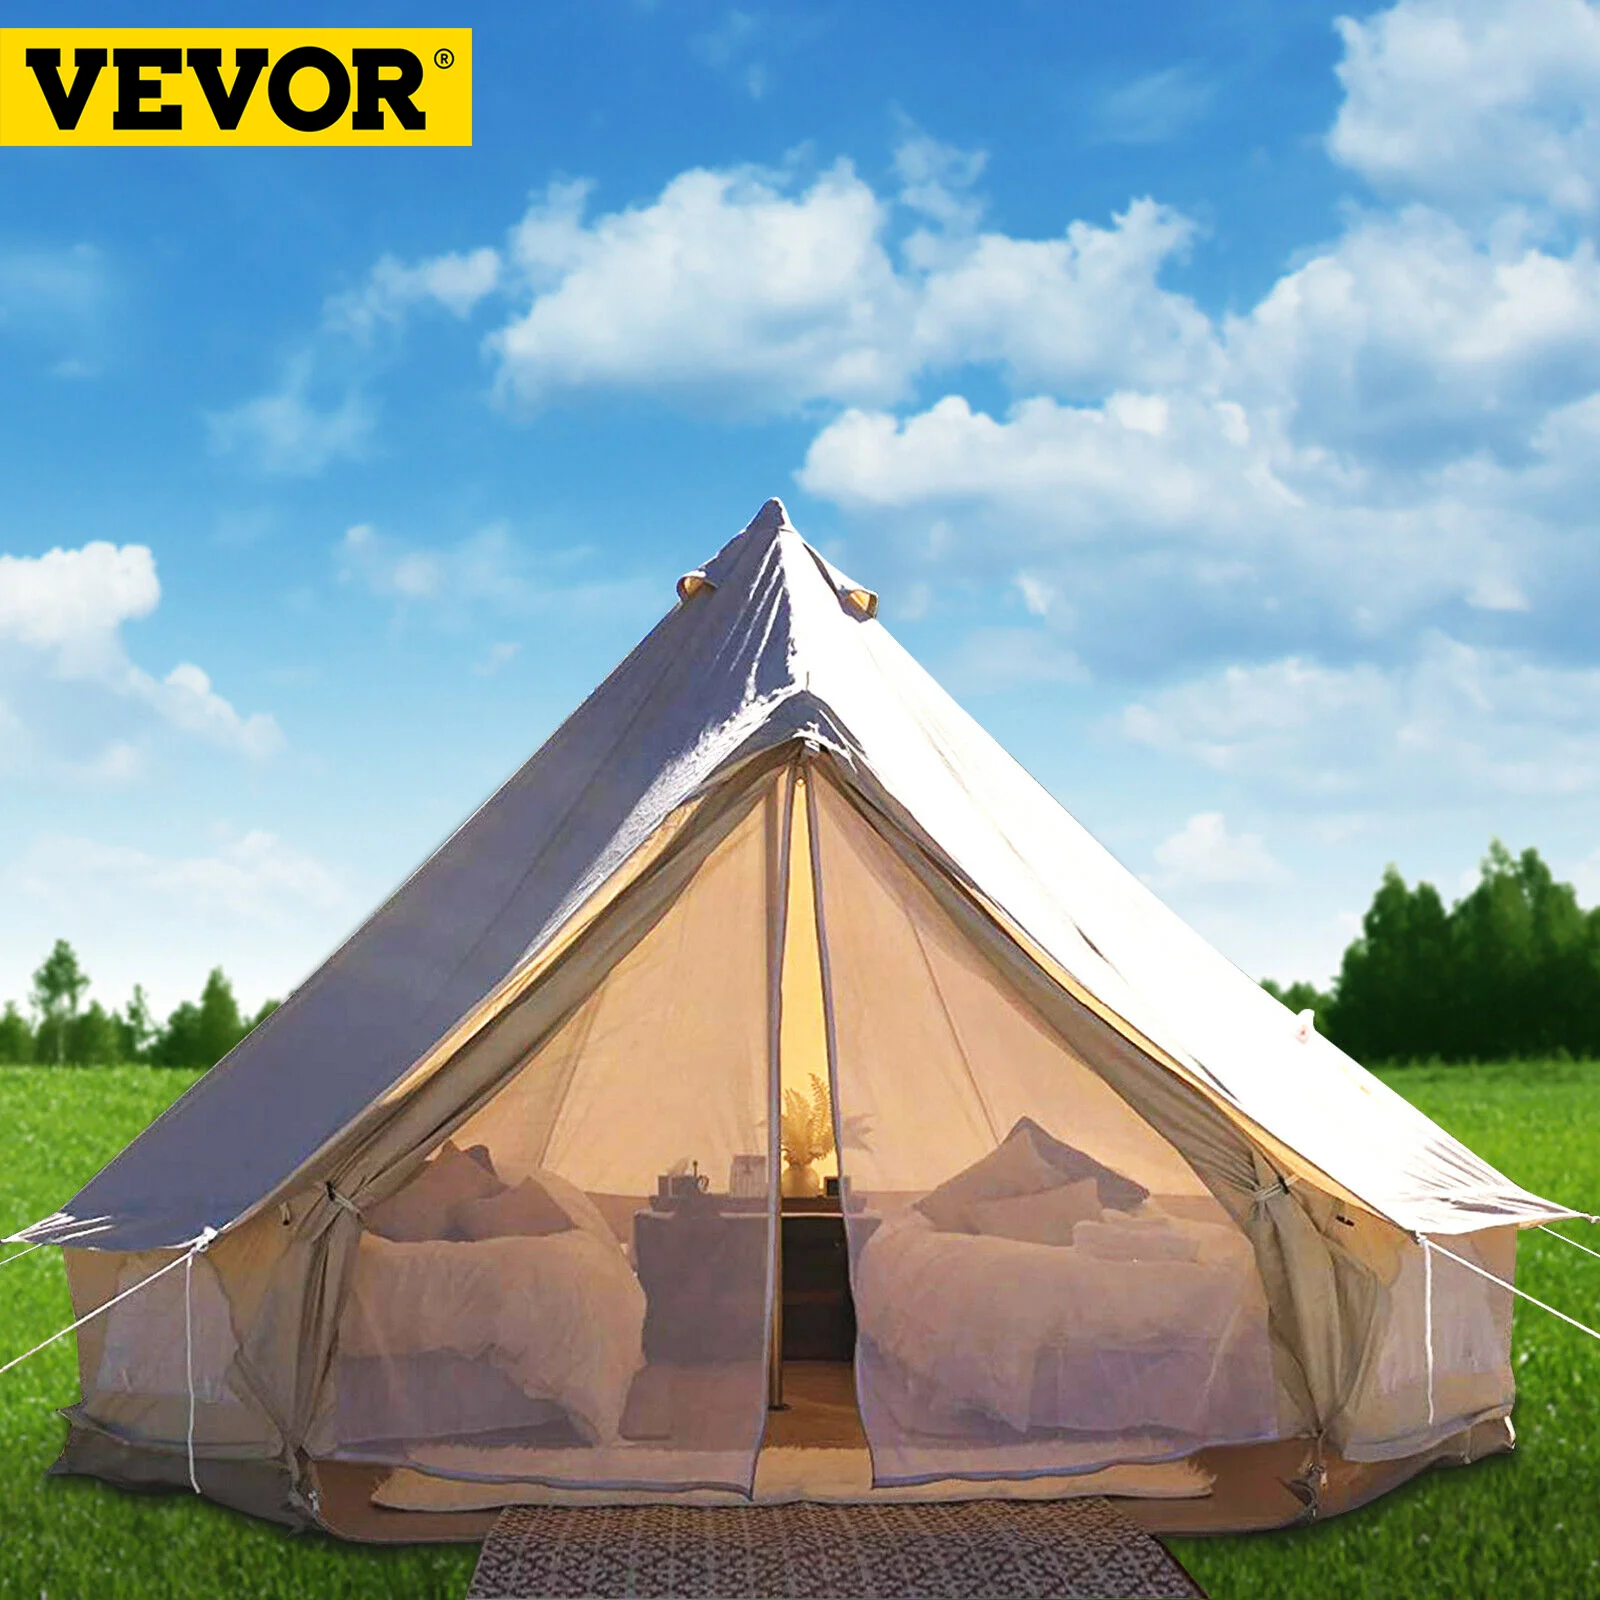 

VEVOR 4-12 Person Camping Tent 3-7m Waterproof Cotton Canvas Bell Tent Outdoor 4 Seasons Family Party Picnic Yurt W/ Stove Hole